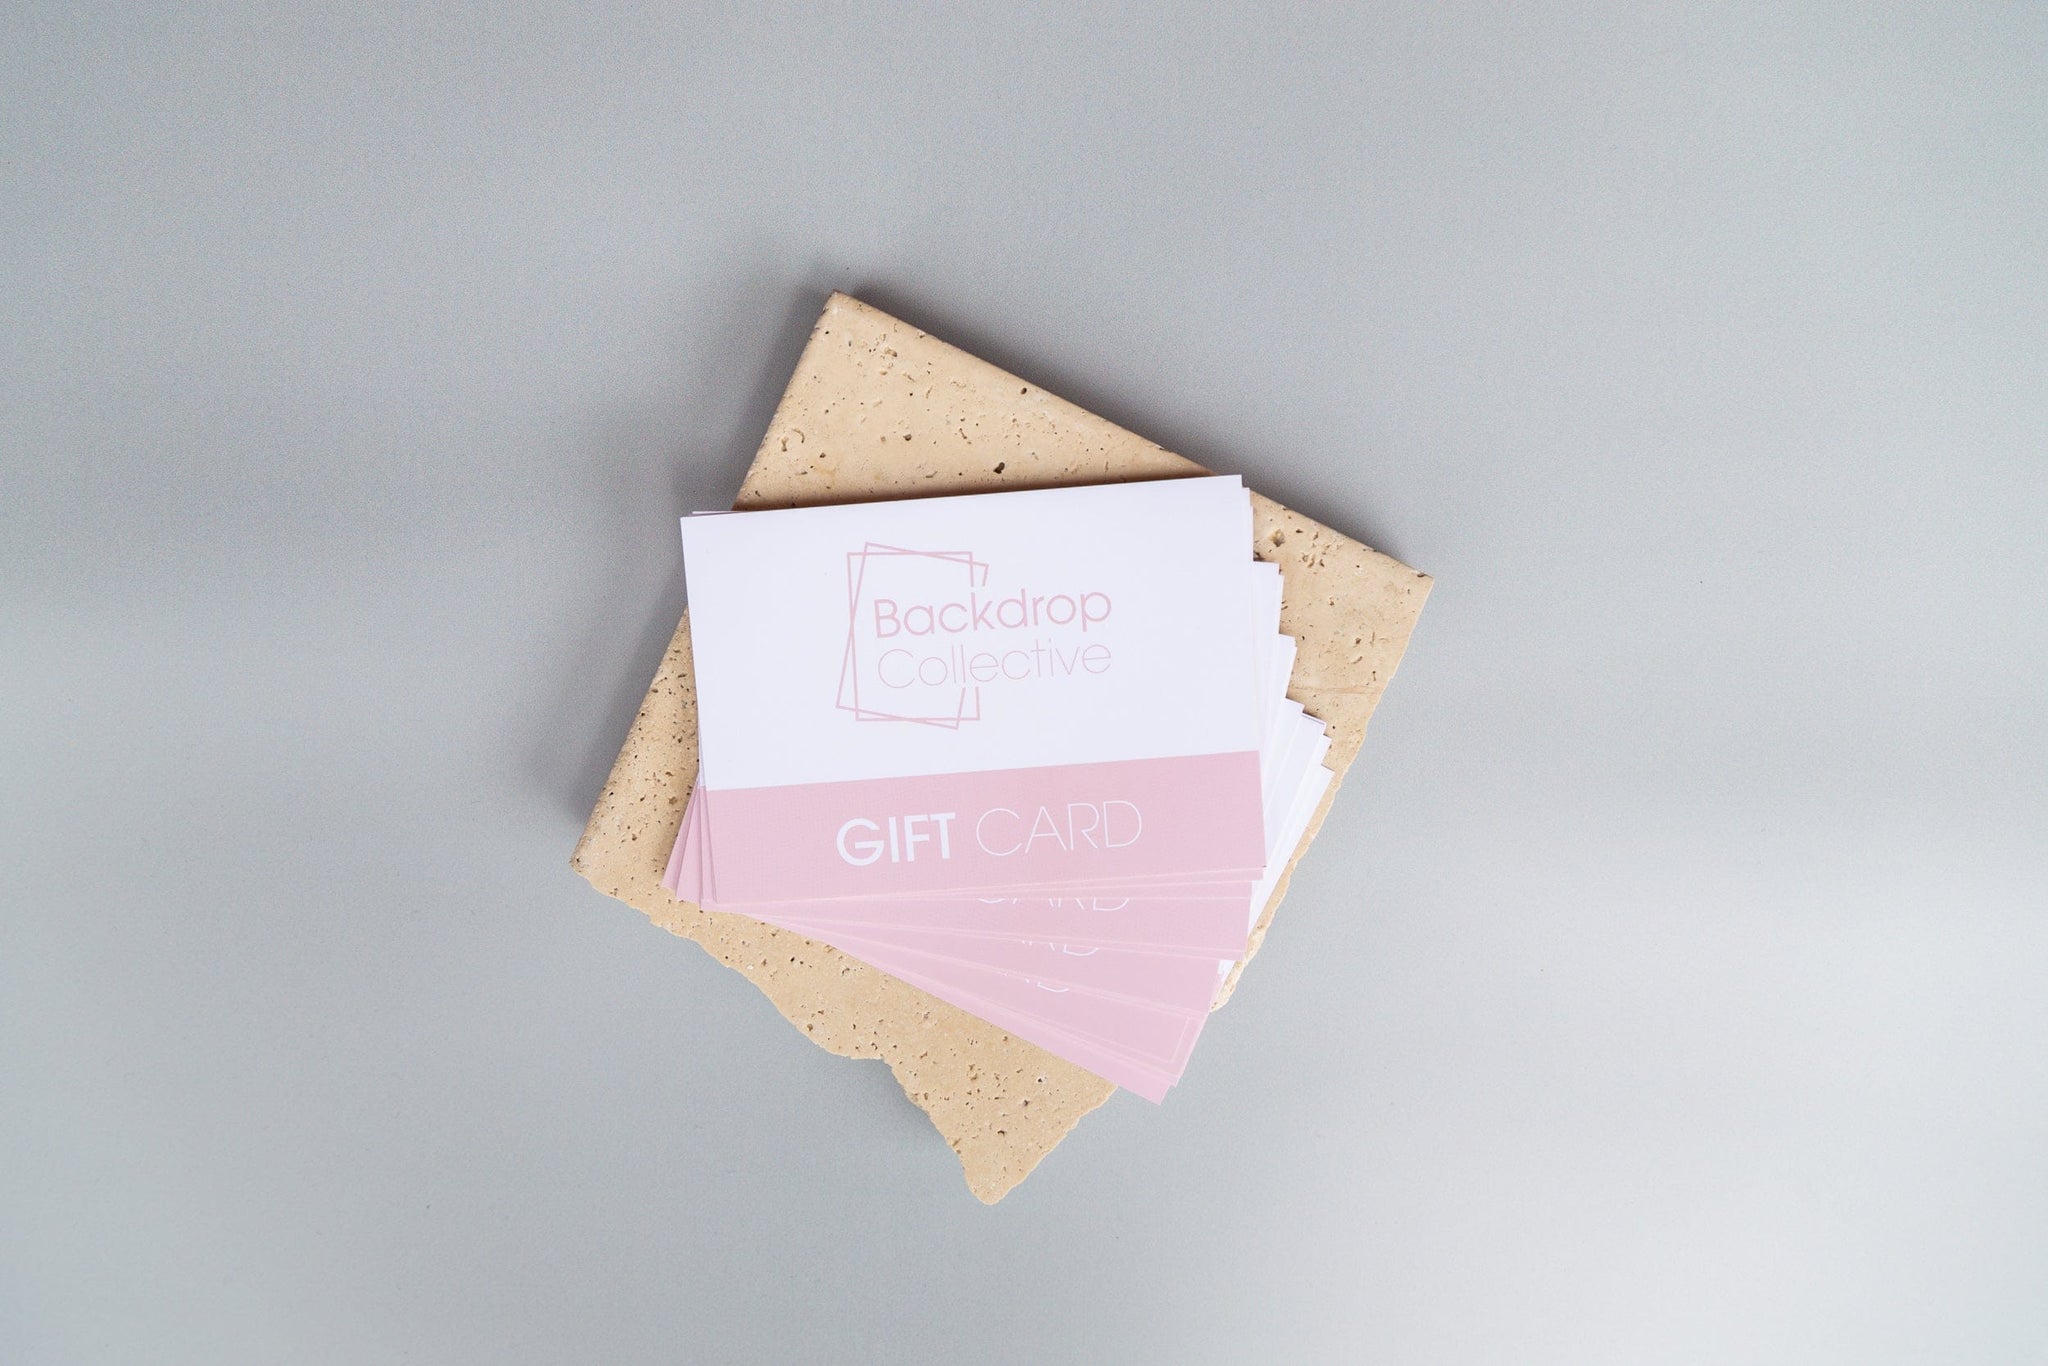 backdrop collective giftcards photographed on travertine stone and light grey photography backdrop - backdrop collective australia